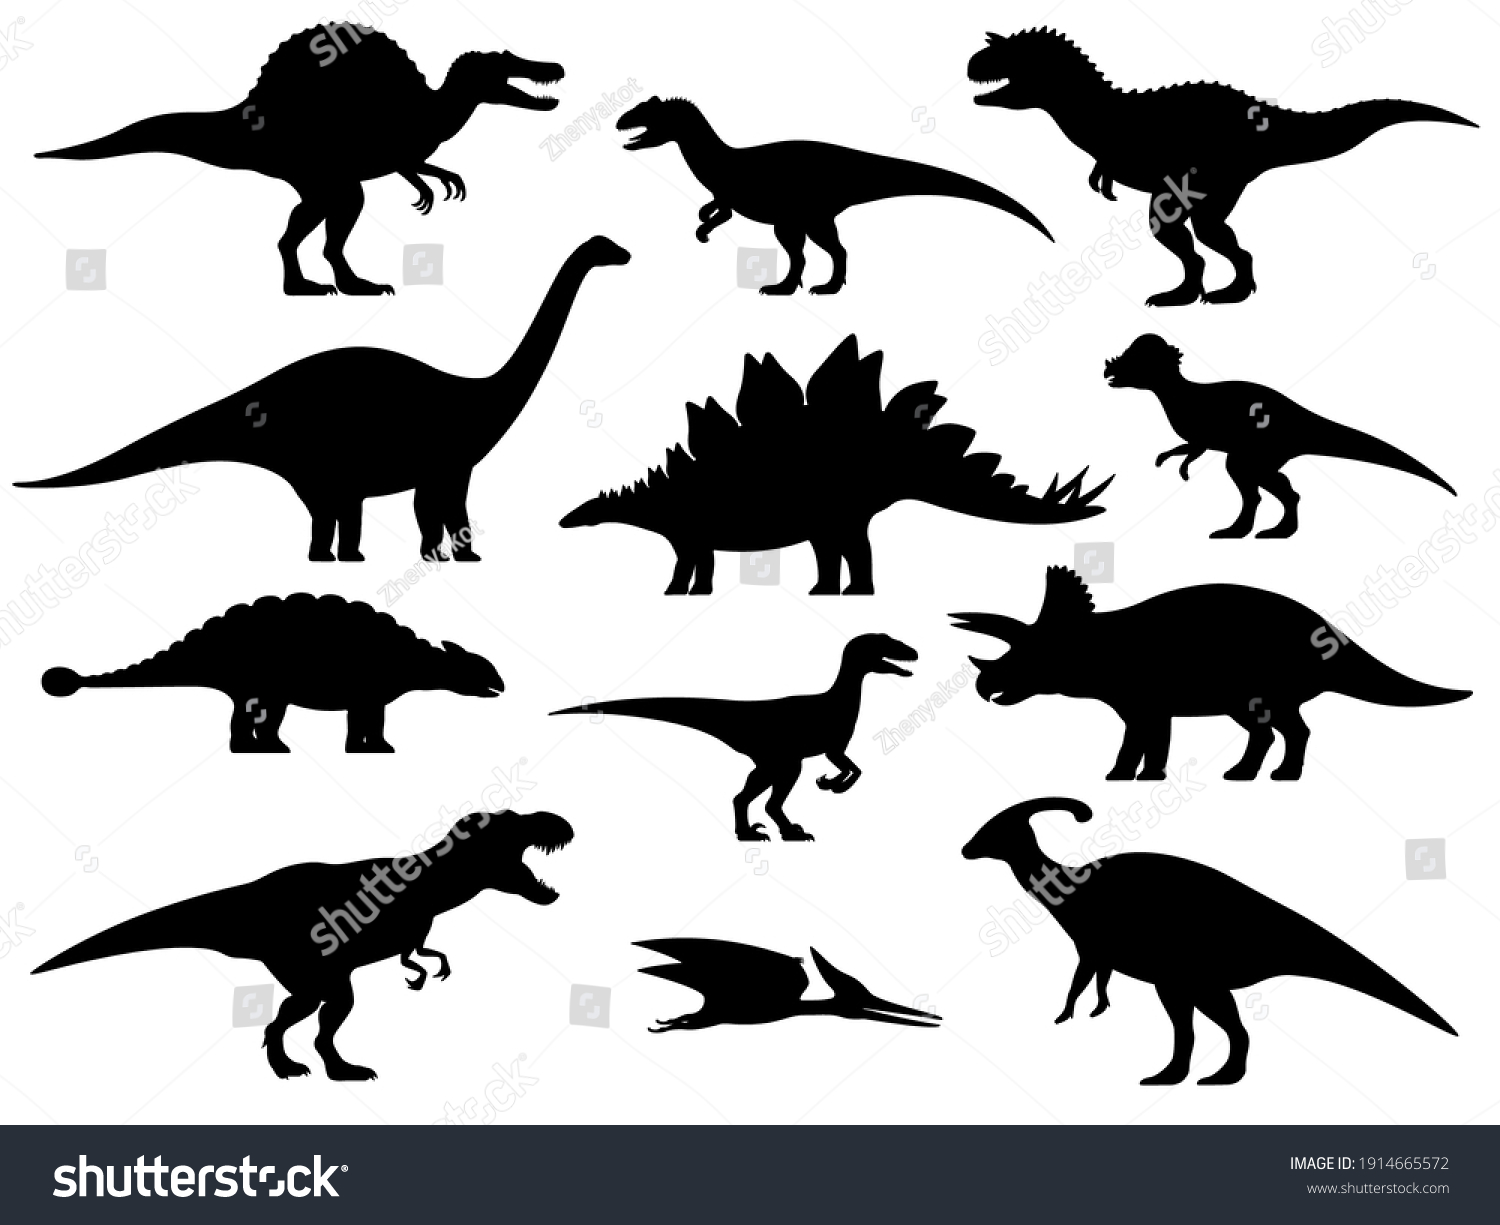 SVG of Set silhouettes of dinosaurs. Vector illustration group of black dinosaur silhouette icons isolated on white. Logo side view, profile. svg